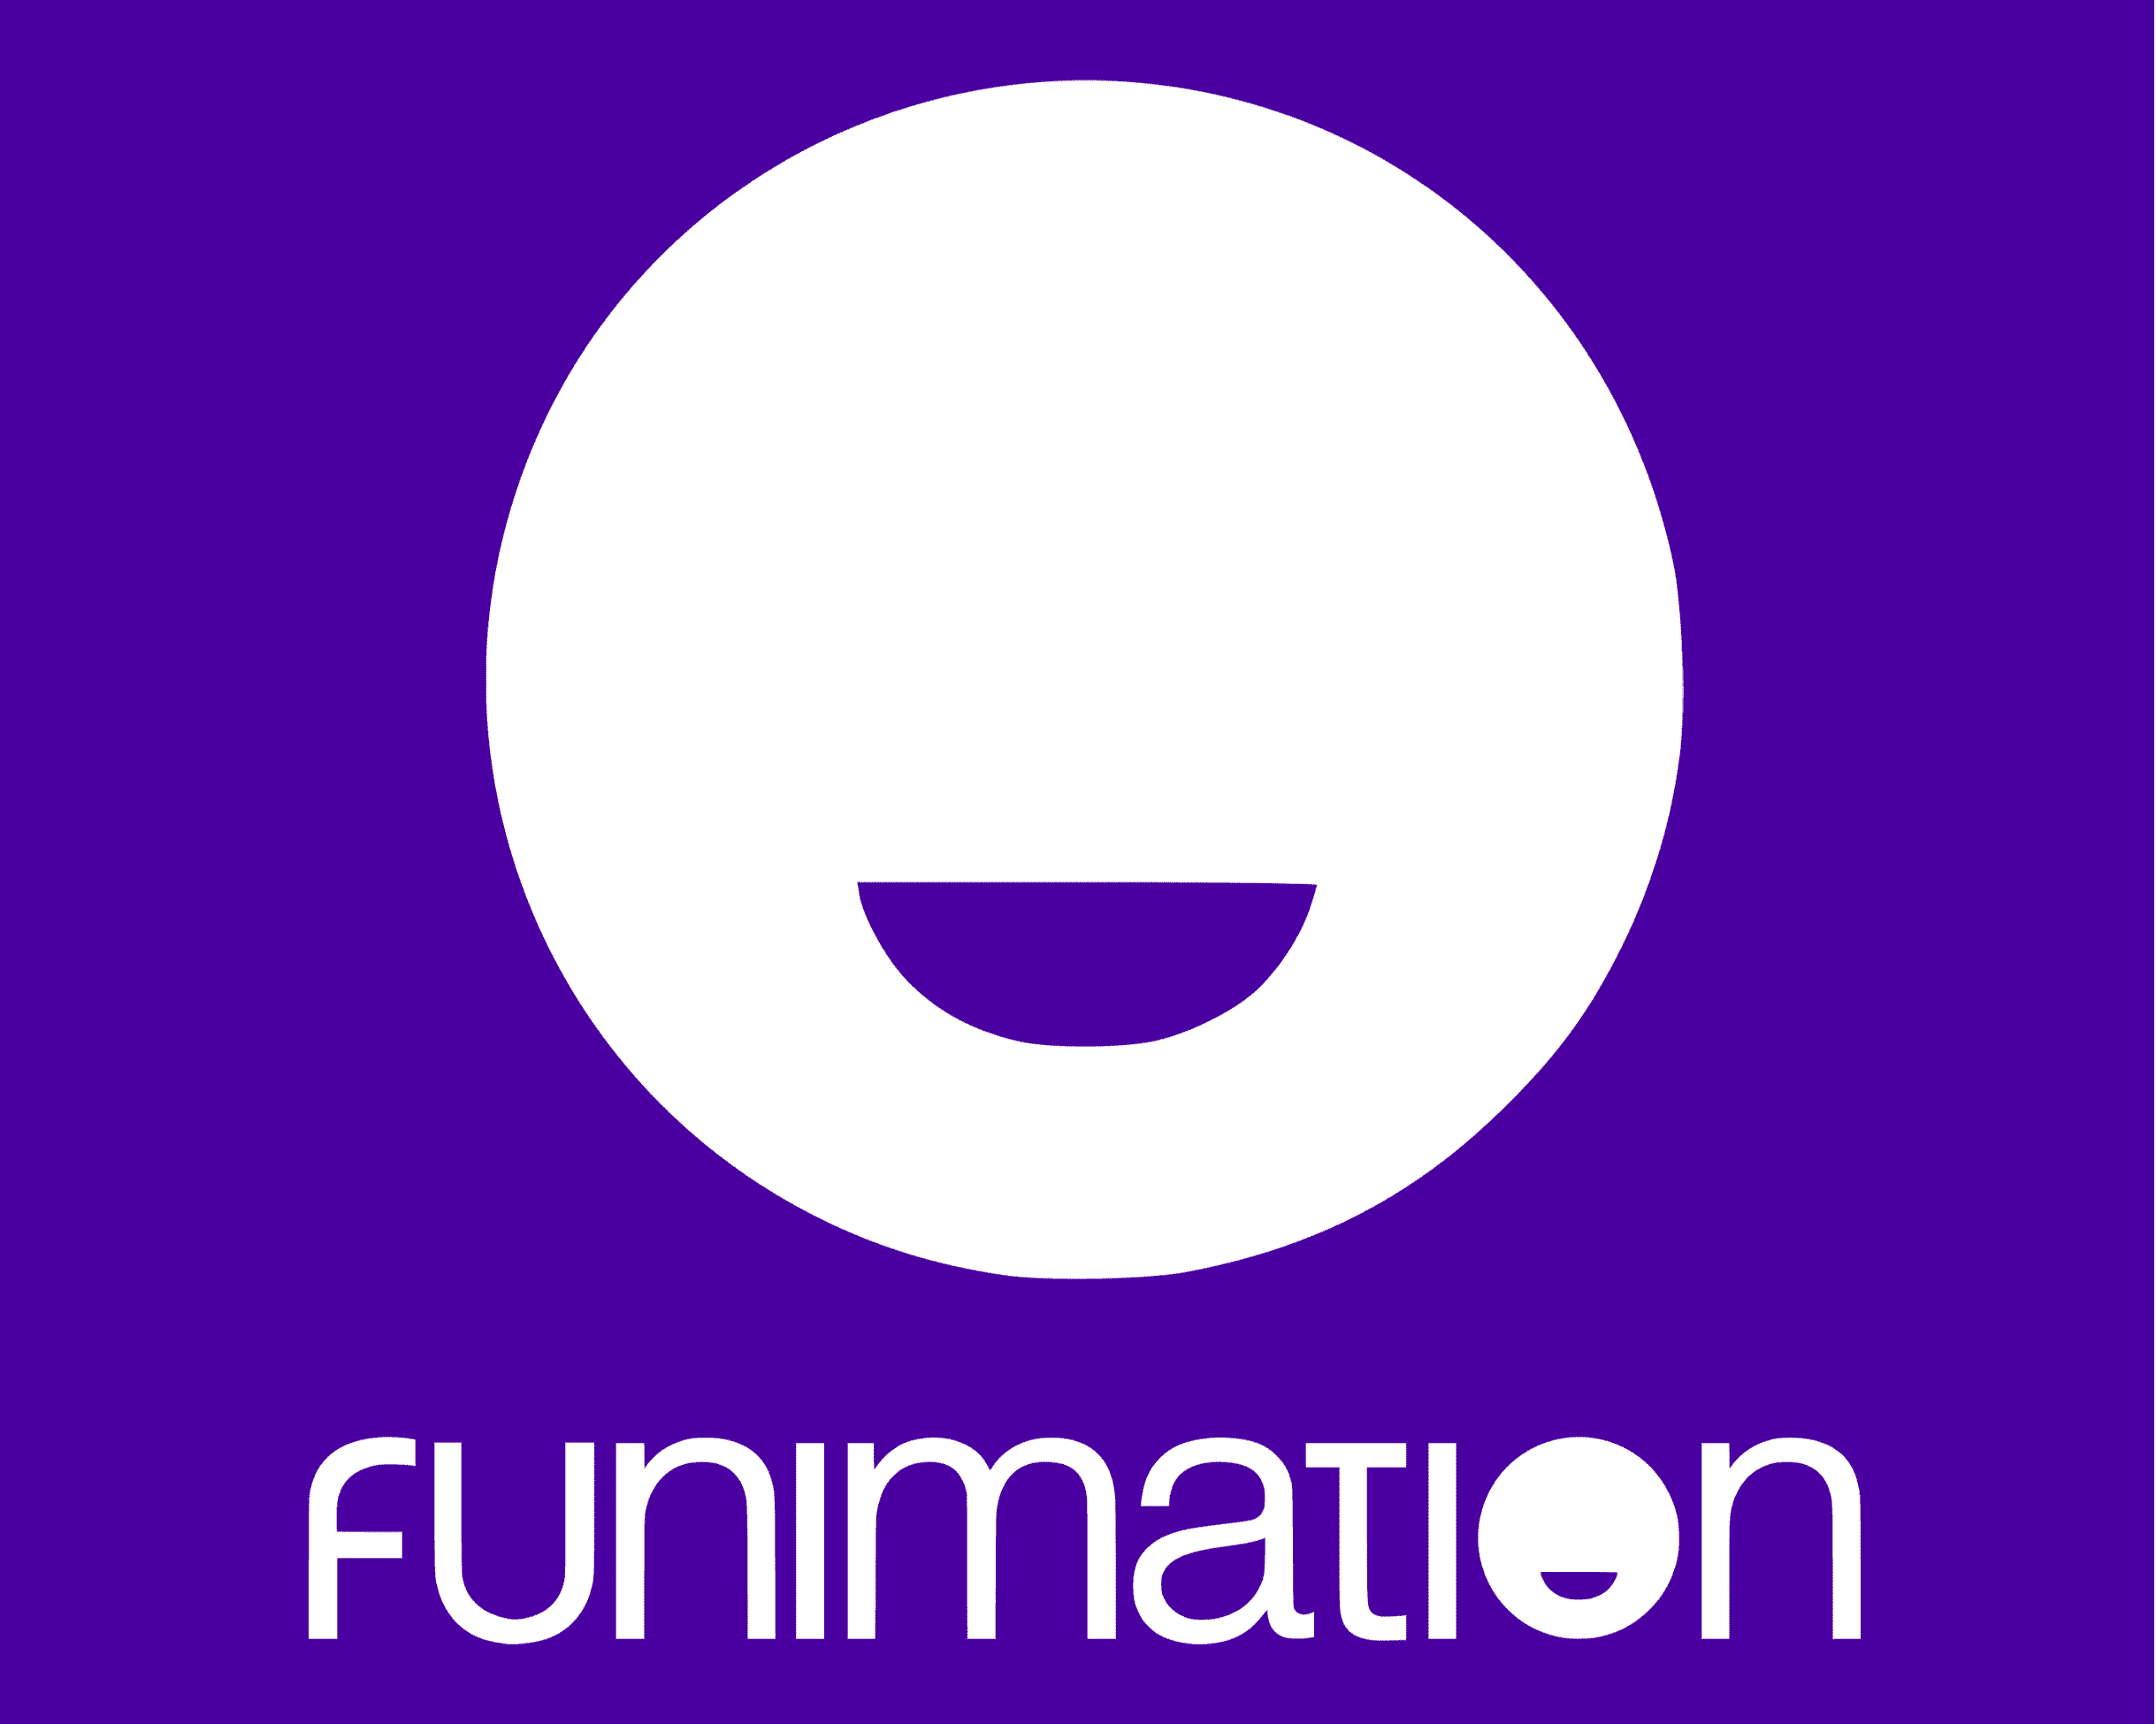 Farewell to Funimation: Legacy Subscribers Face Price Hikes and Digital Library Wipeout